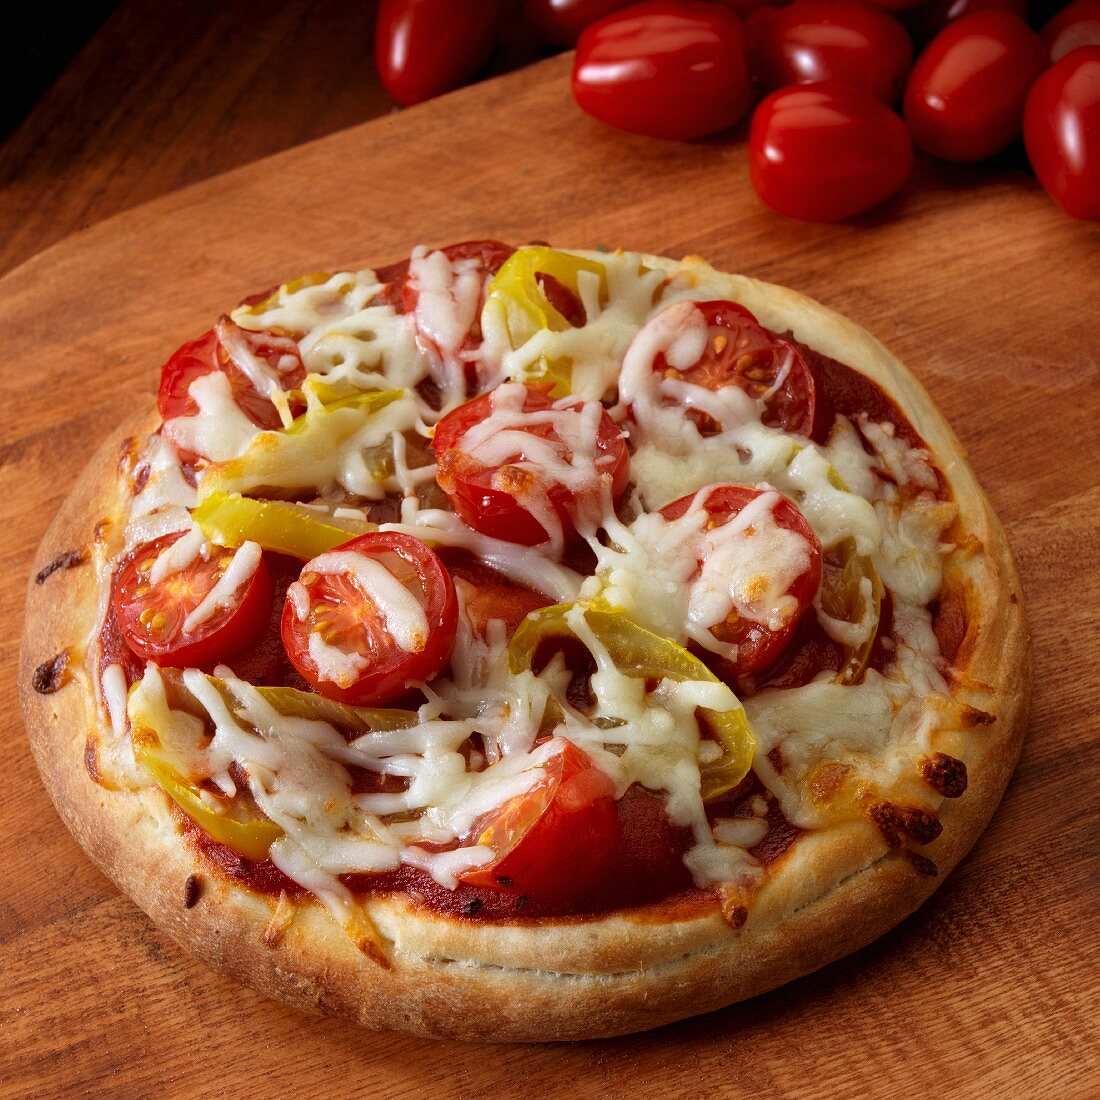 Small pizza with cherry tomatoes and peppers